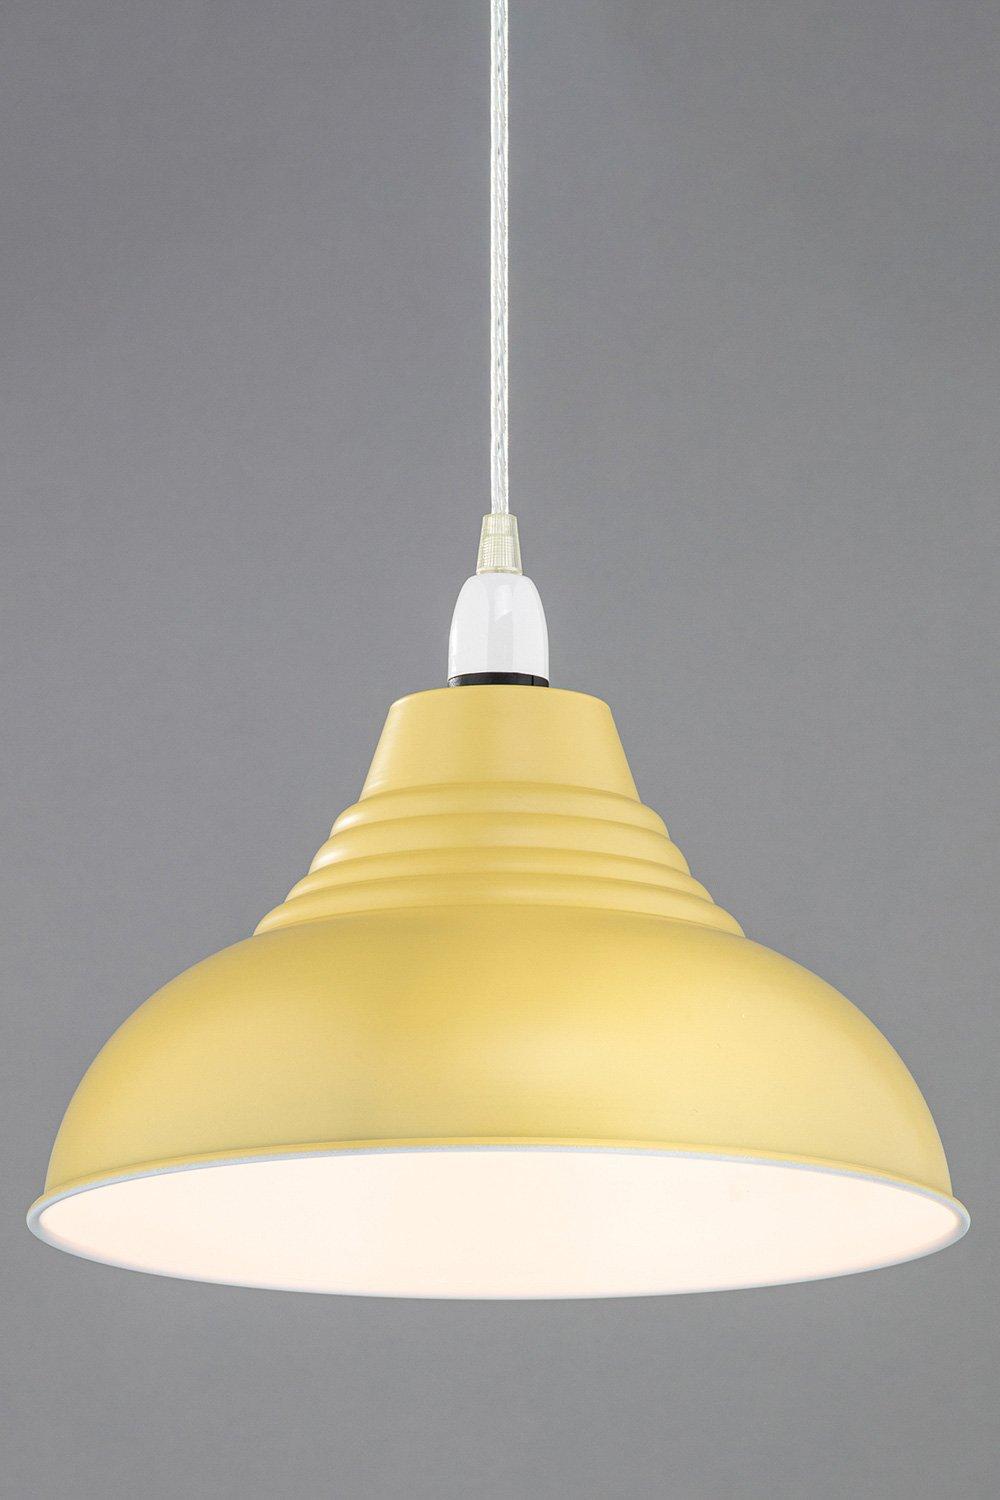 BHS Lighting Steel Diner Easy Fit Light Shade|yellow